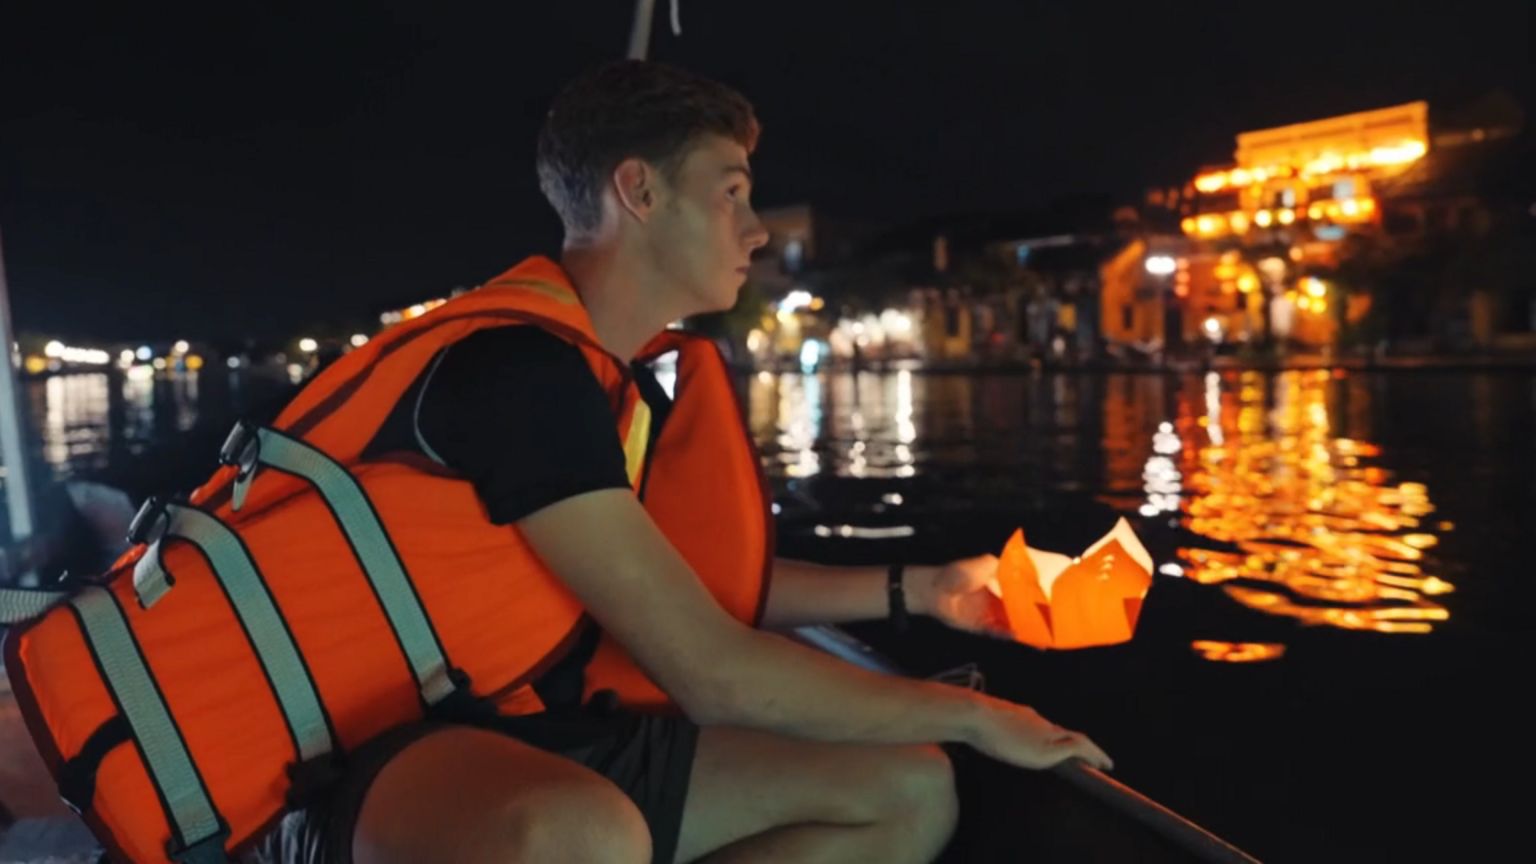 Alfie Watts, wearing a life jacket, leans out of a boat as he prepares to place a lantern with a candle in it on the water